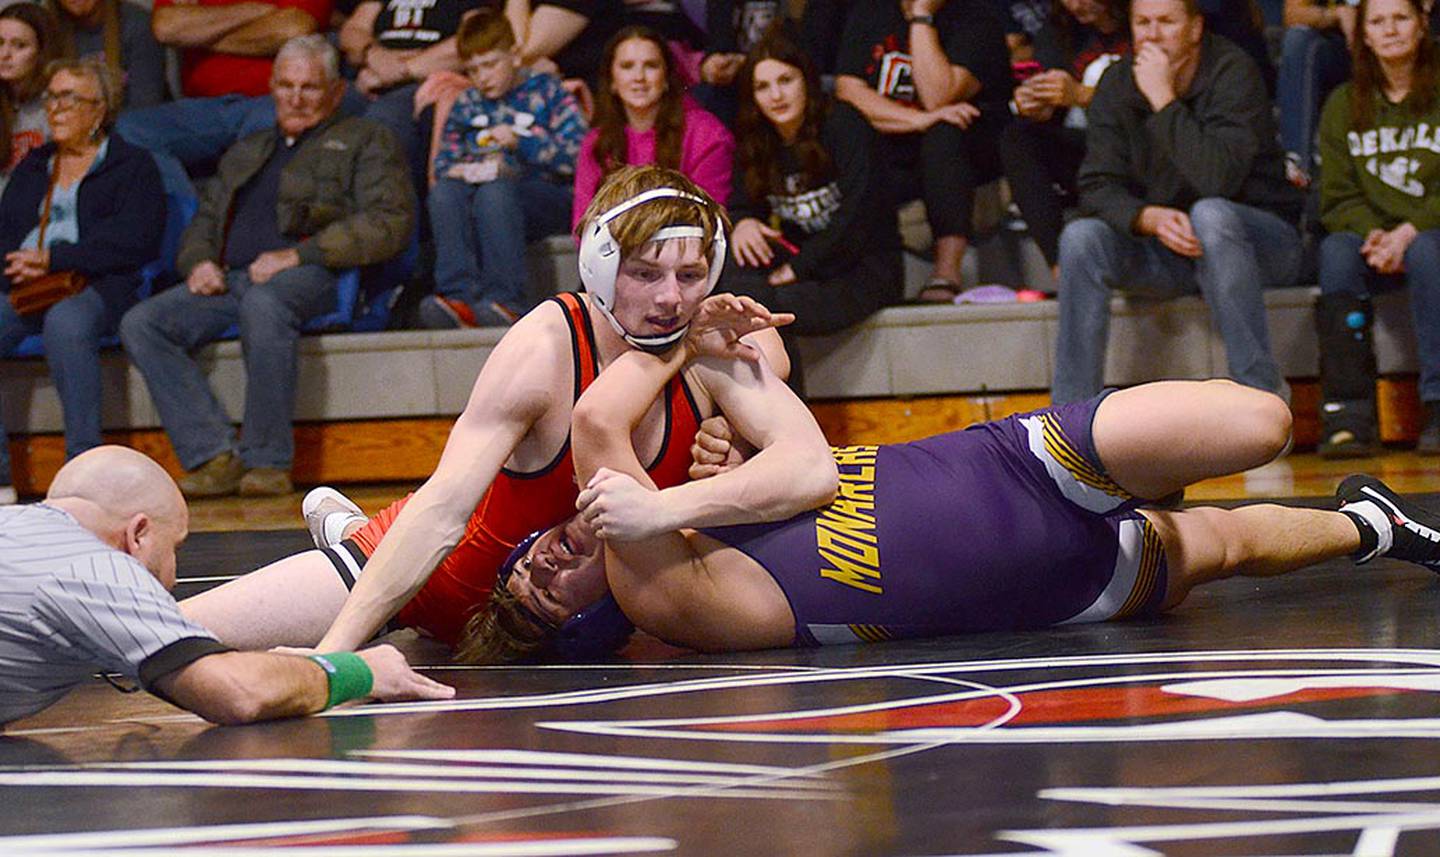 Carson Rieck, one of 11 seniors on this year's Creston boys wrestling team, earns nearfall points while gaining a 17-0 technical fall against Victor Arroyo of Denison-Schleswig Thursday night.